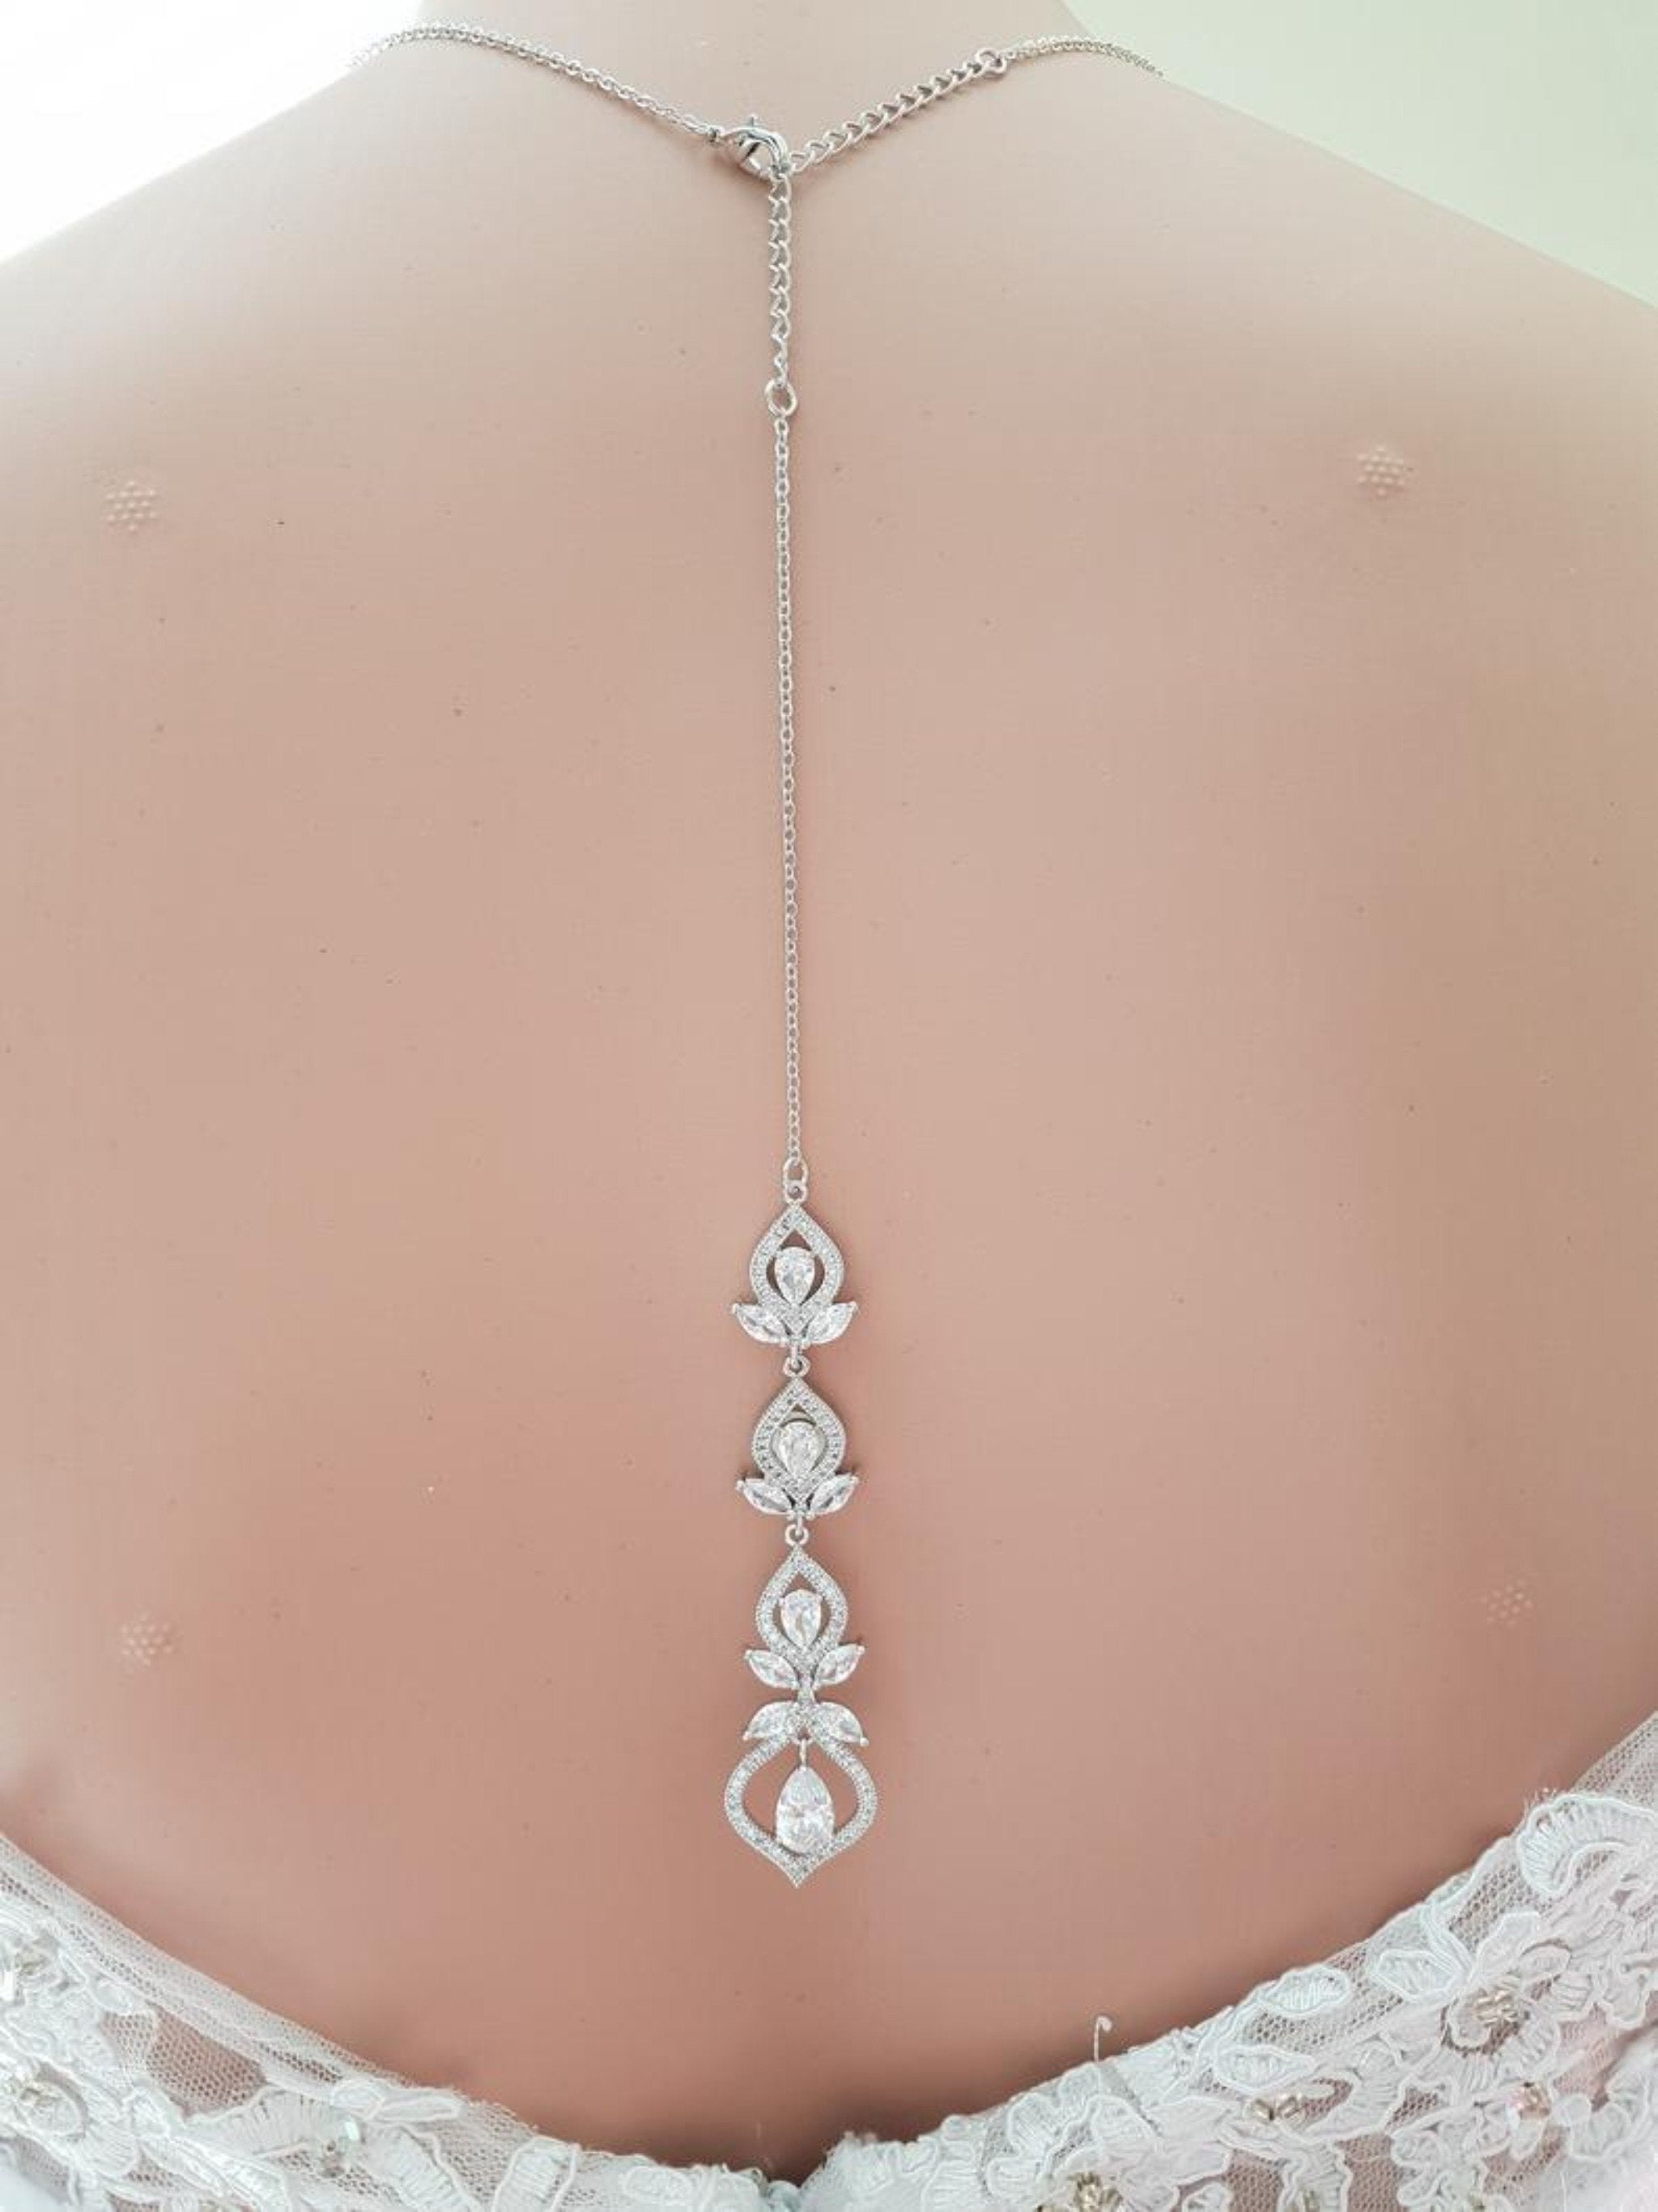 Simulated Pearls Bridal Backdrop Lariat Necklace Perfect For Weddings,  Bikini Bodychains, And Dress Accessories From Yy_dhhome, $22.8 | DHgate.Com